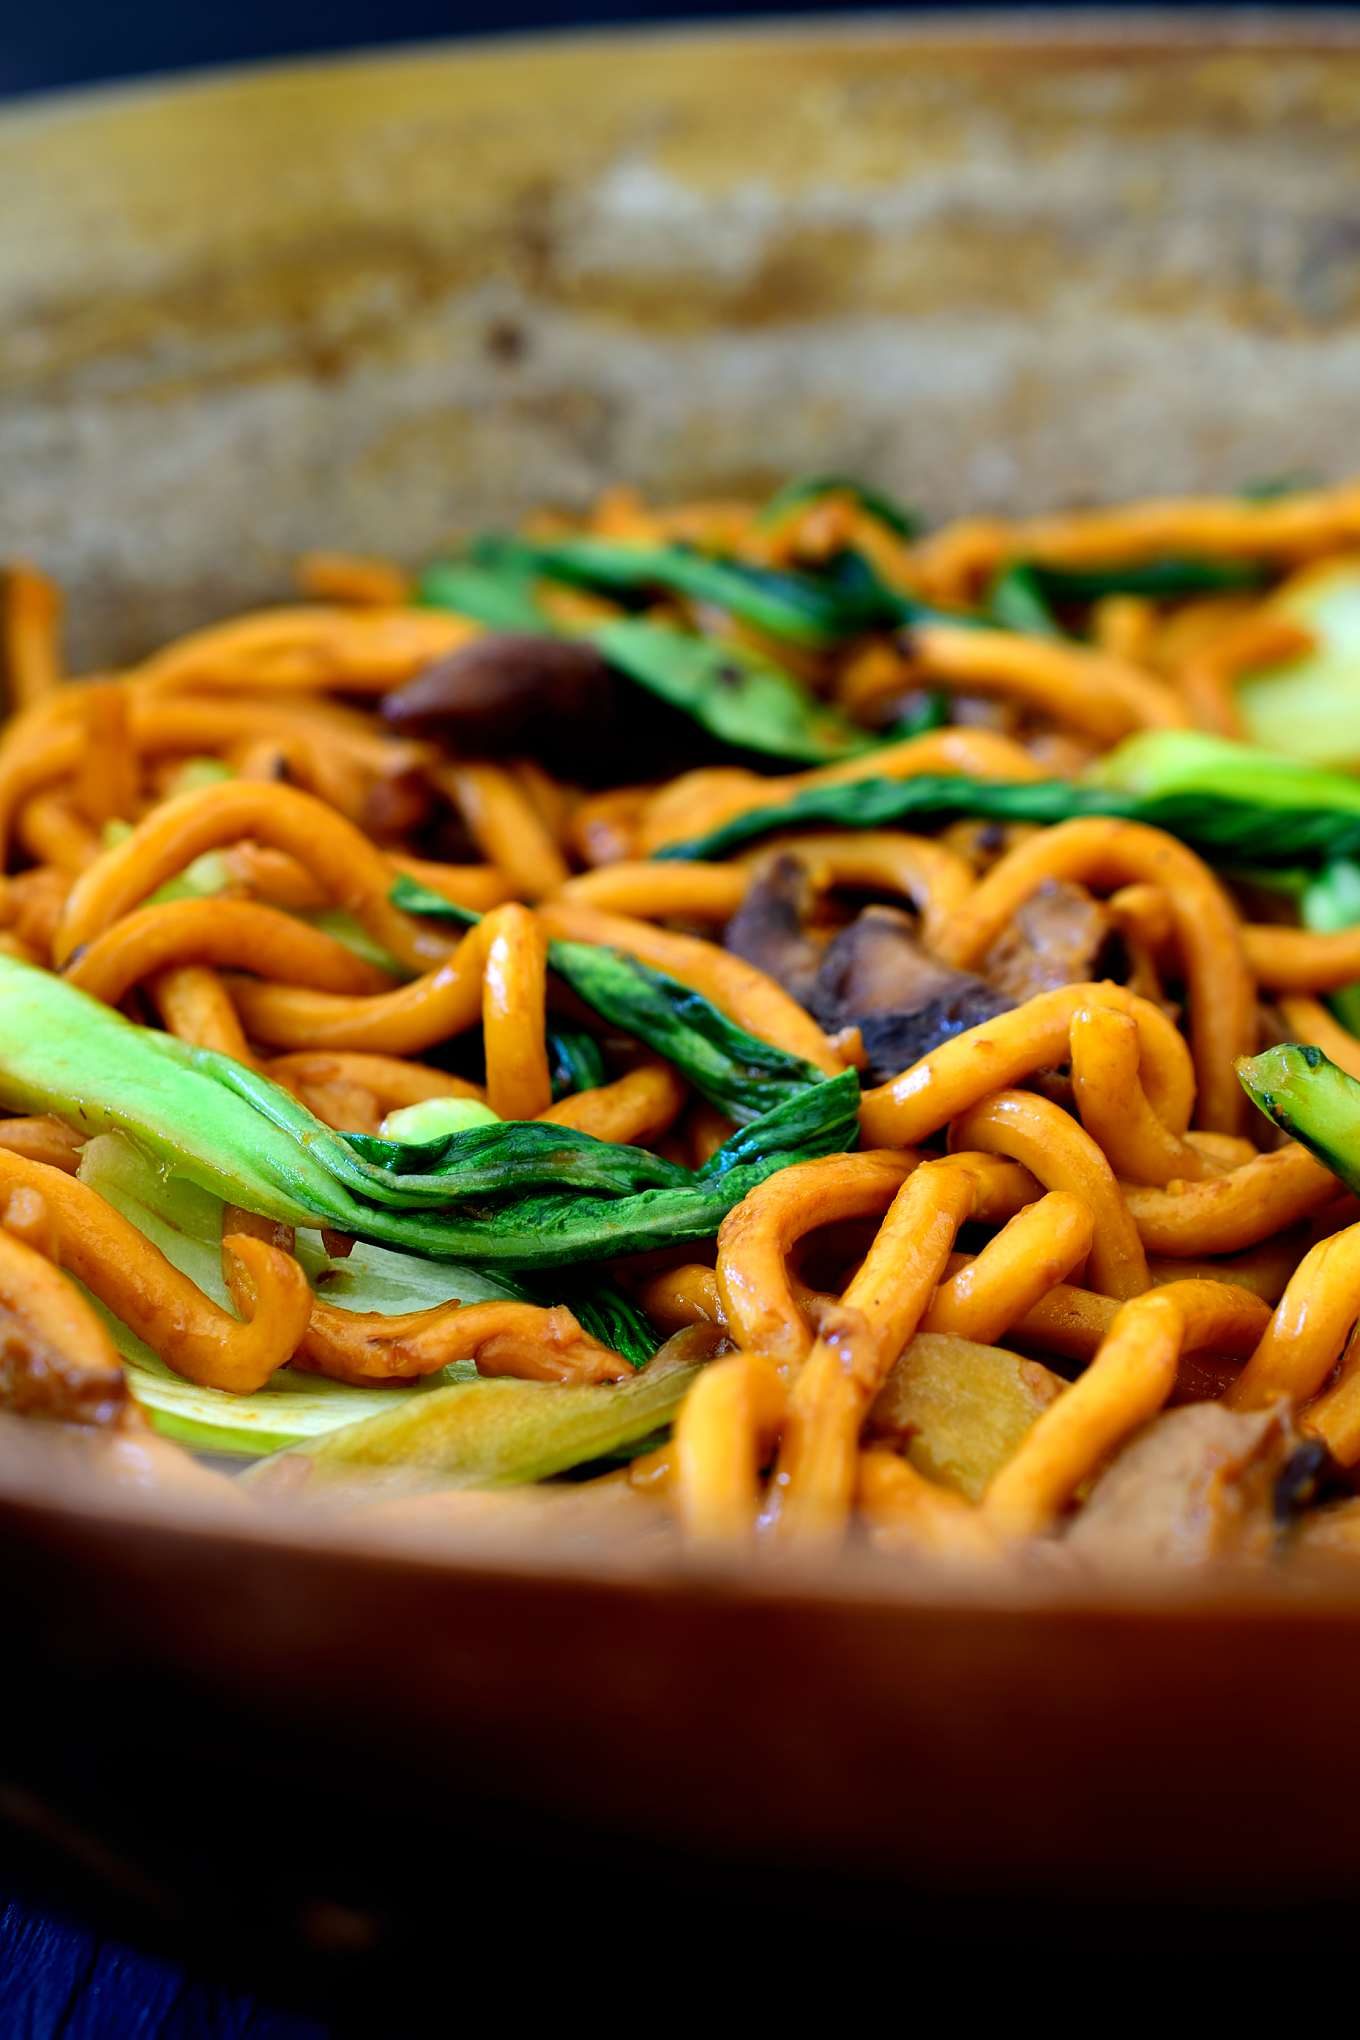 This vegetarian udon noodle recipe with bok choy and shiitake mushrooms is a delicious and filling easy udon noodle recipe that’s ready in just 15 minutes and great for a weeknight dinner. Soft and slurpy udon noodles with crisp, fresh bok choy and meaty shiitake mushrooms dressed simply with soy sauce will satisfy every craving! 